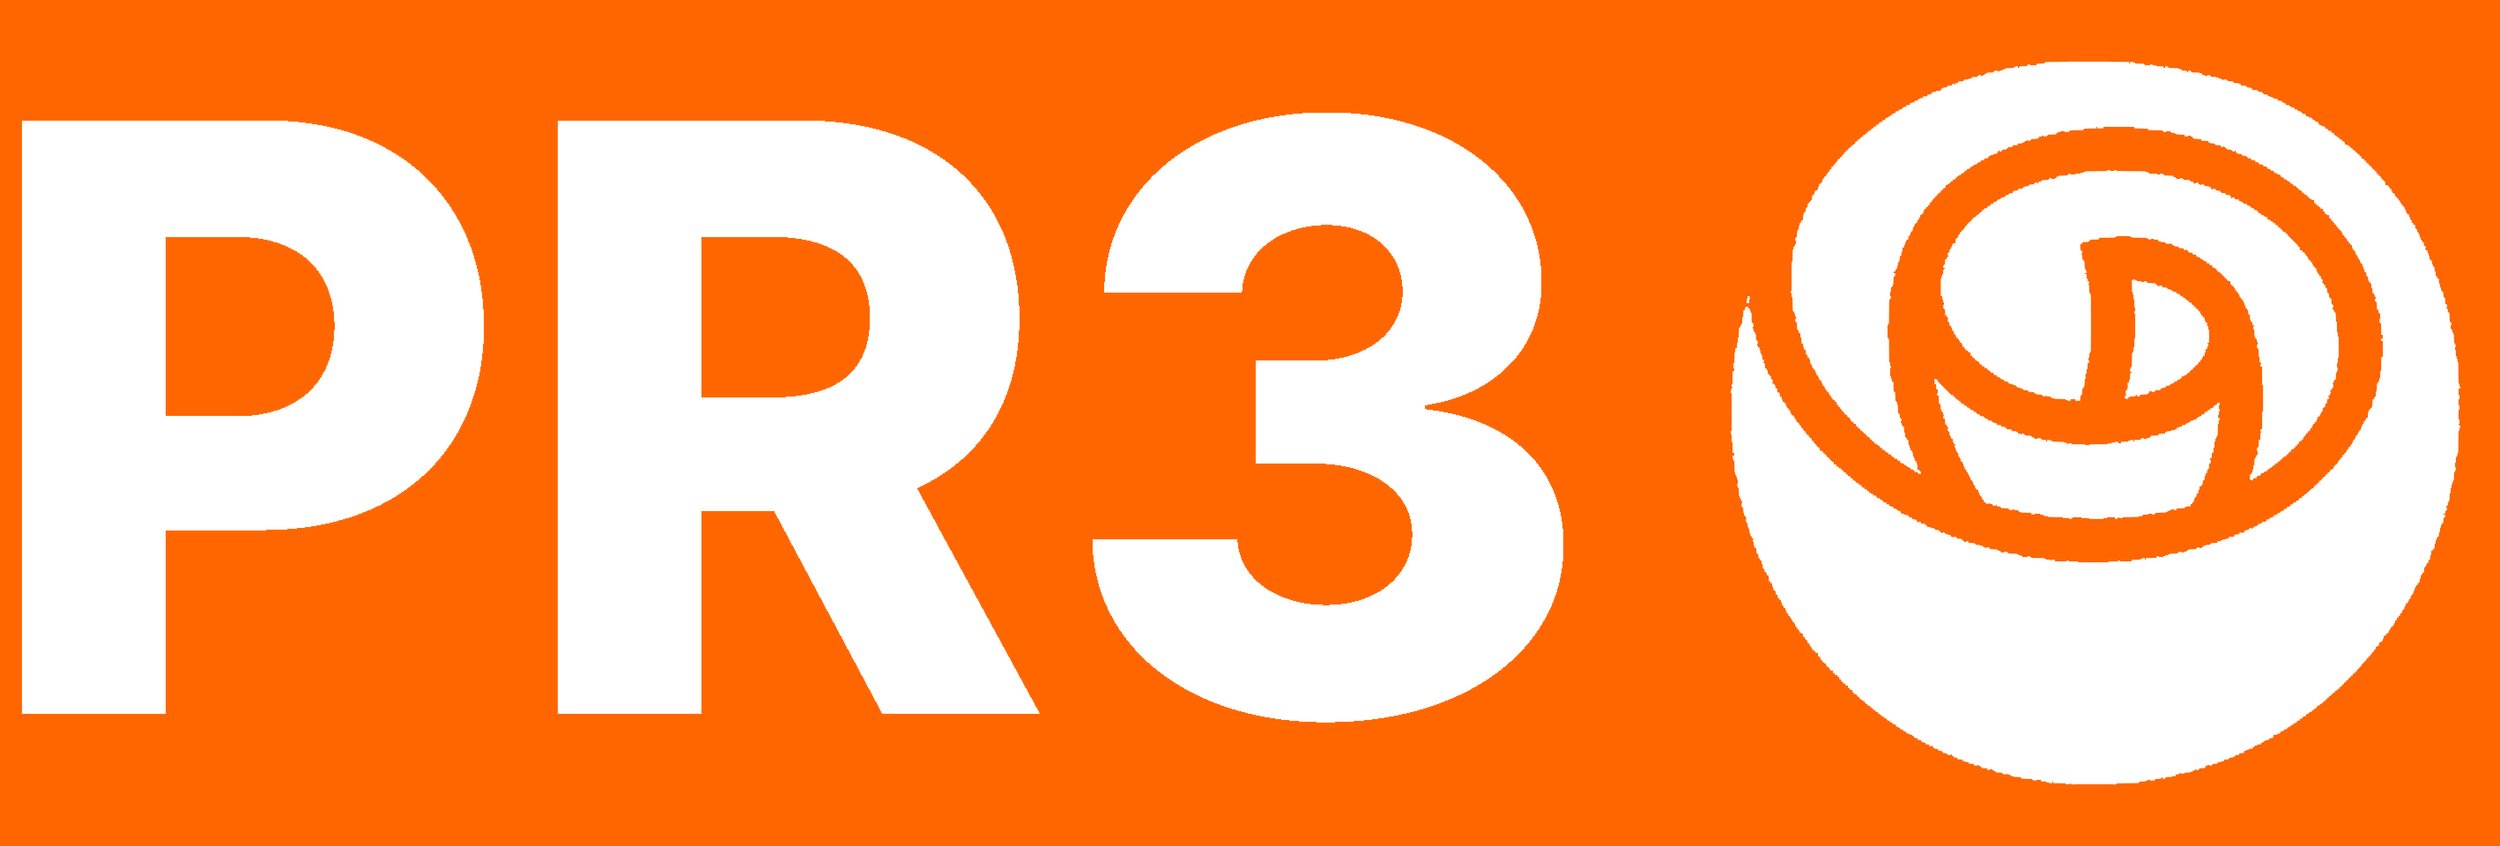 PR3 - The Alliance to Advance Reuse